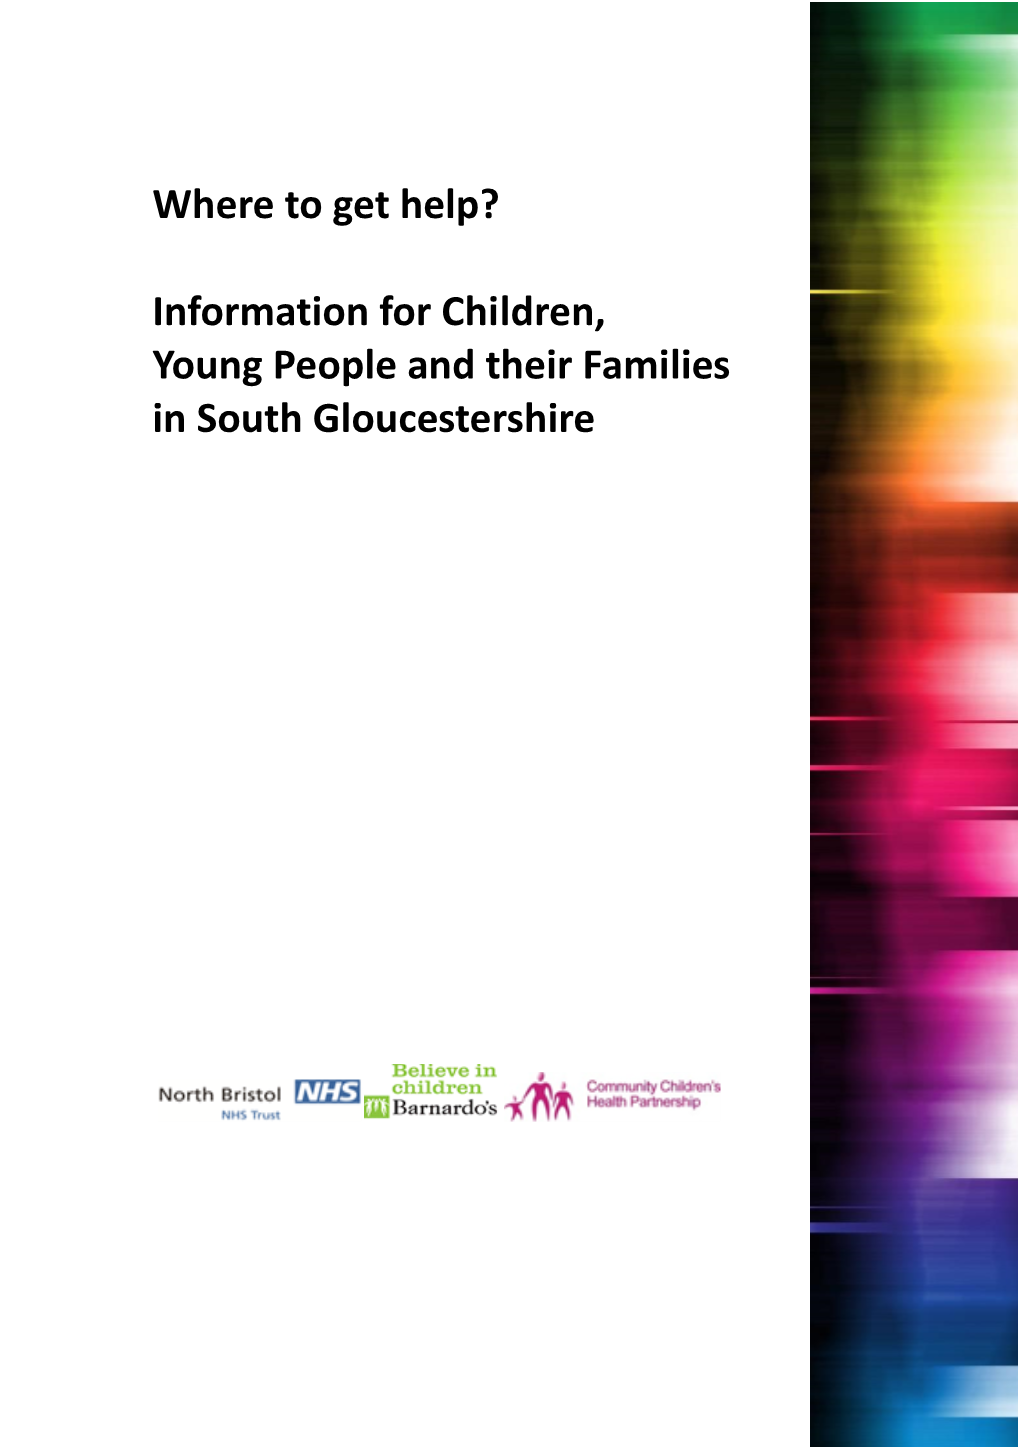 Information for Children, Young People and Their Families in South Gloucestershire